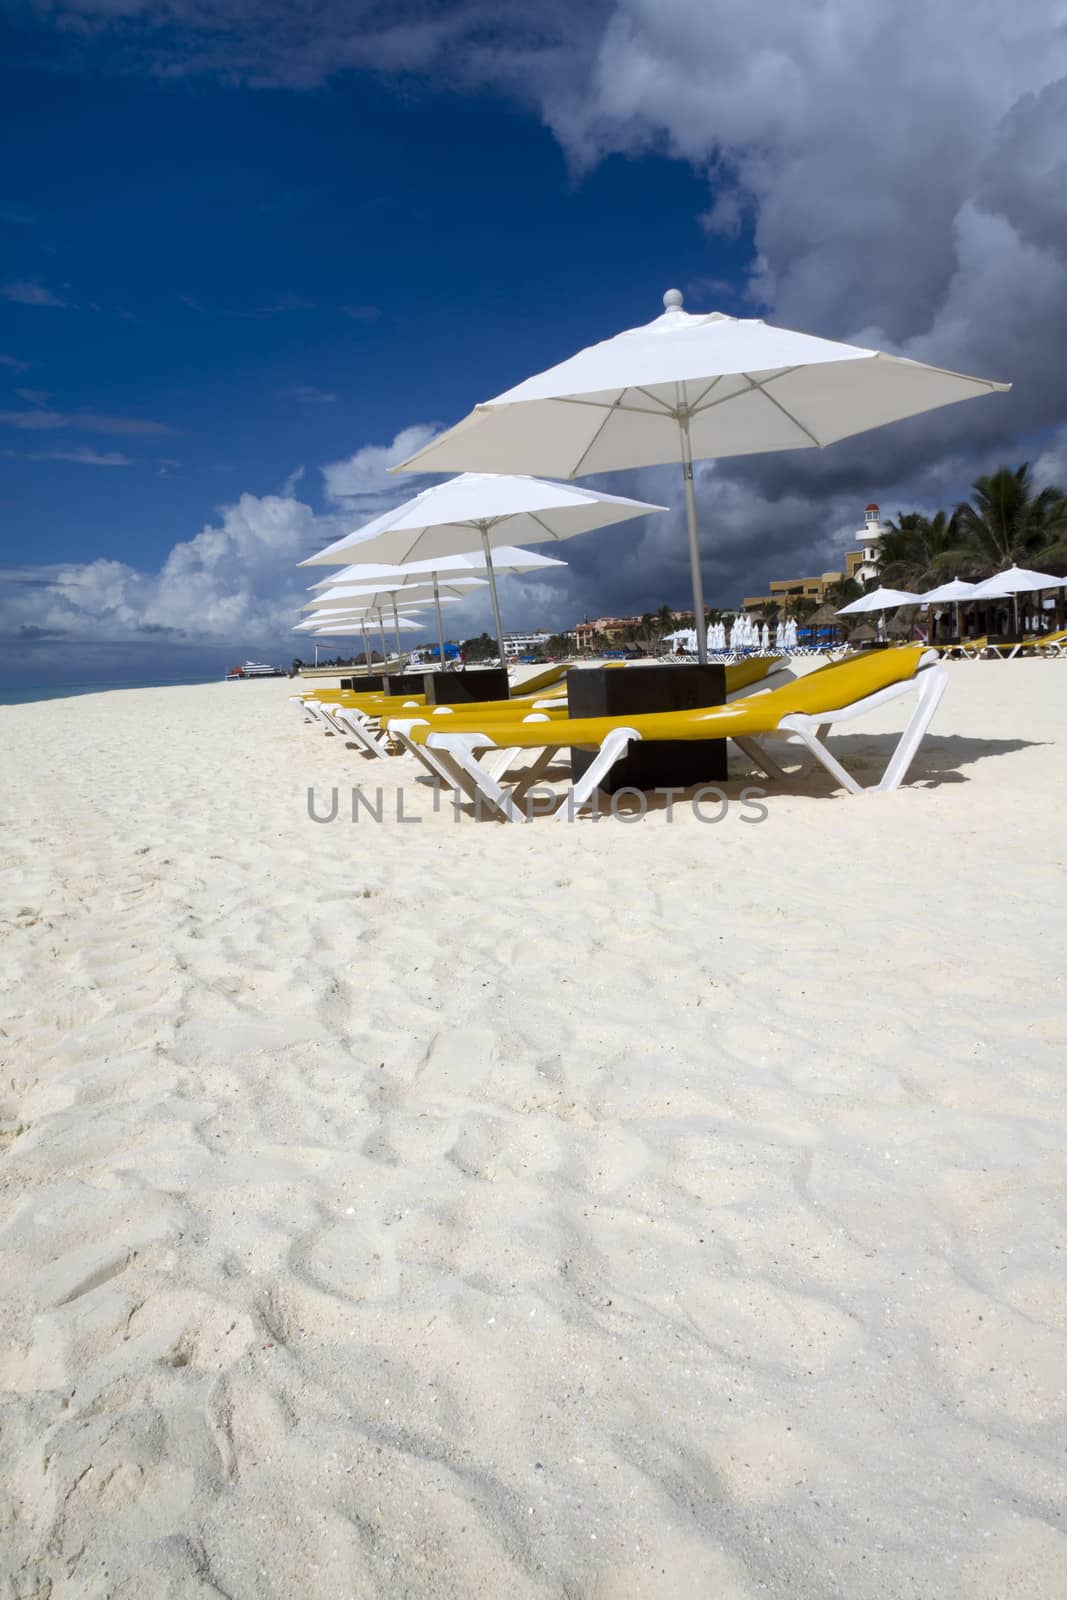 Rows of several lounge chairs and umbrellas on the beach